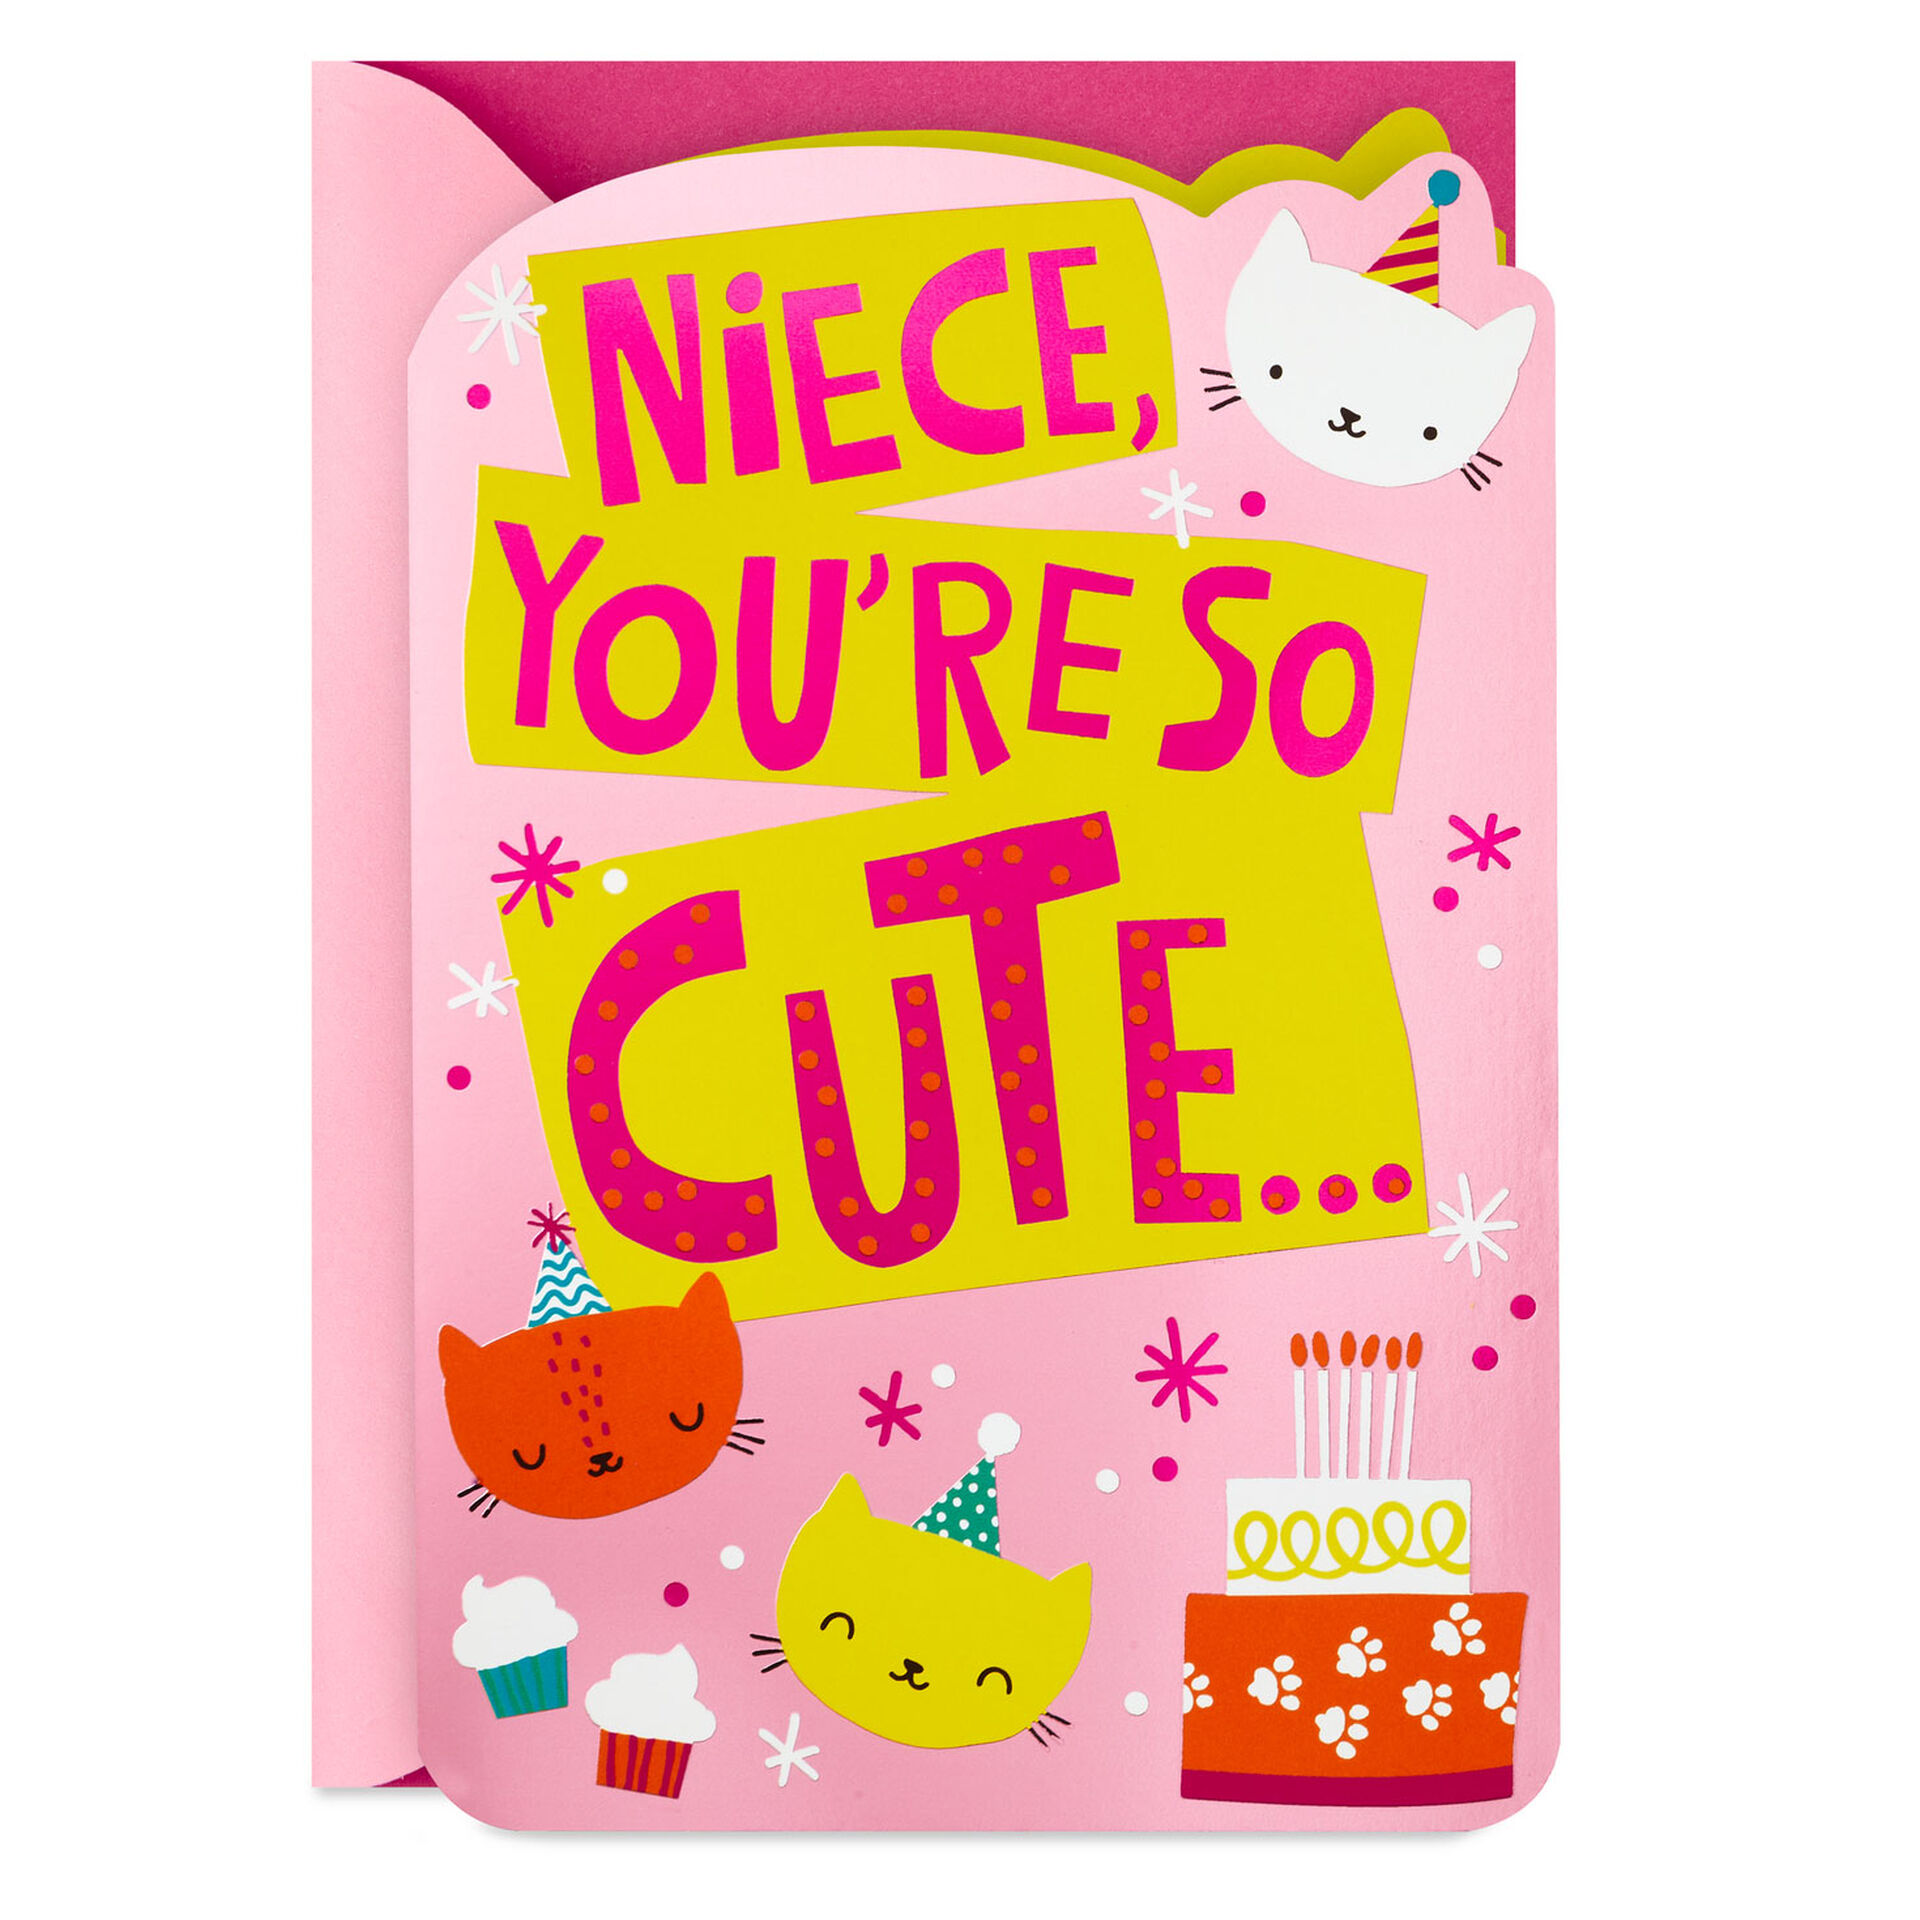 Cats-and-Cake-Kids-Birthday-Card-for-Niece_399HKB6120_01